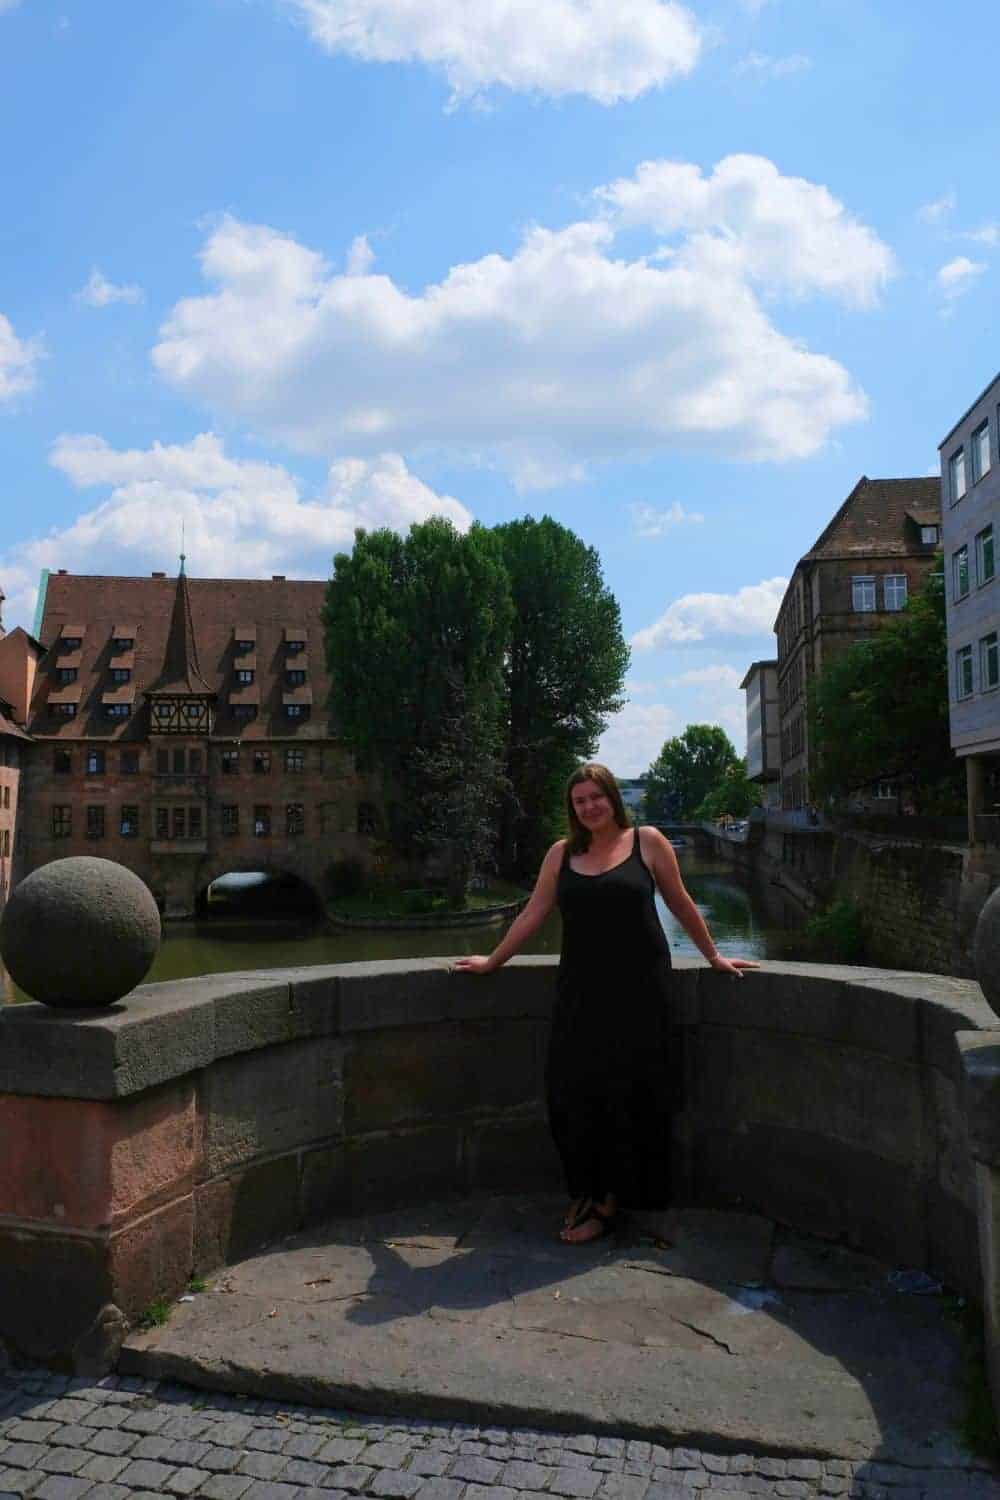 The same woman smiles as she leans on the balustrade of a bridge in Nuremberg on a sunny day, with traditional German architecture and lush trees behind her, embodying the joy of exploring the city's rich history and culture.